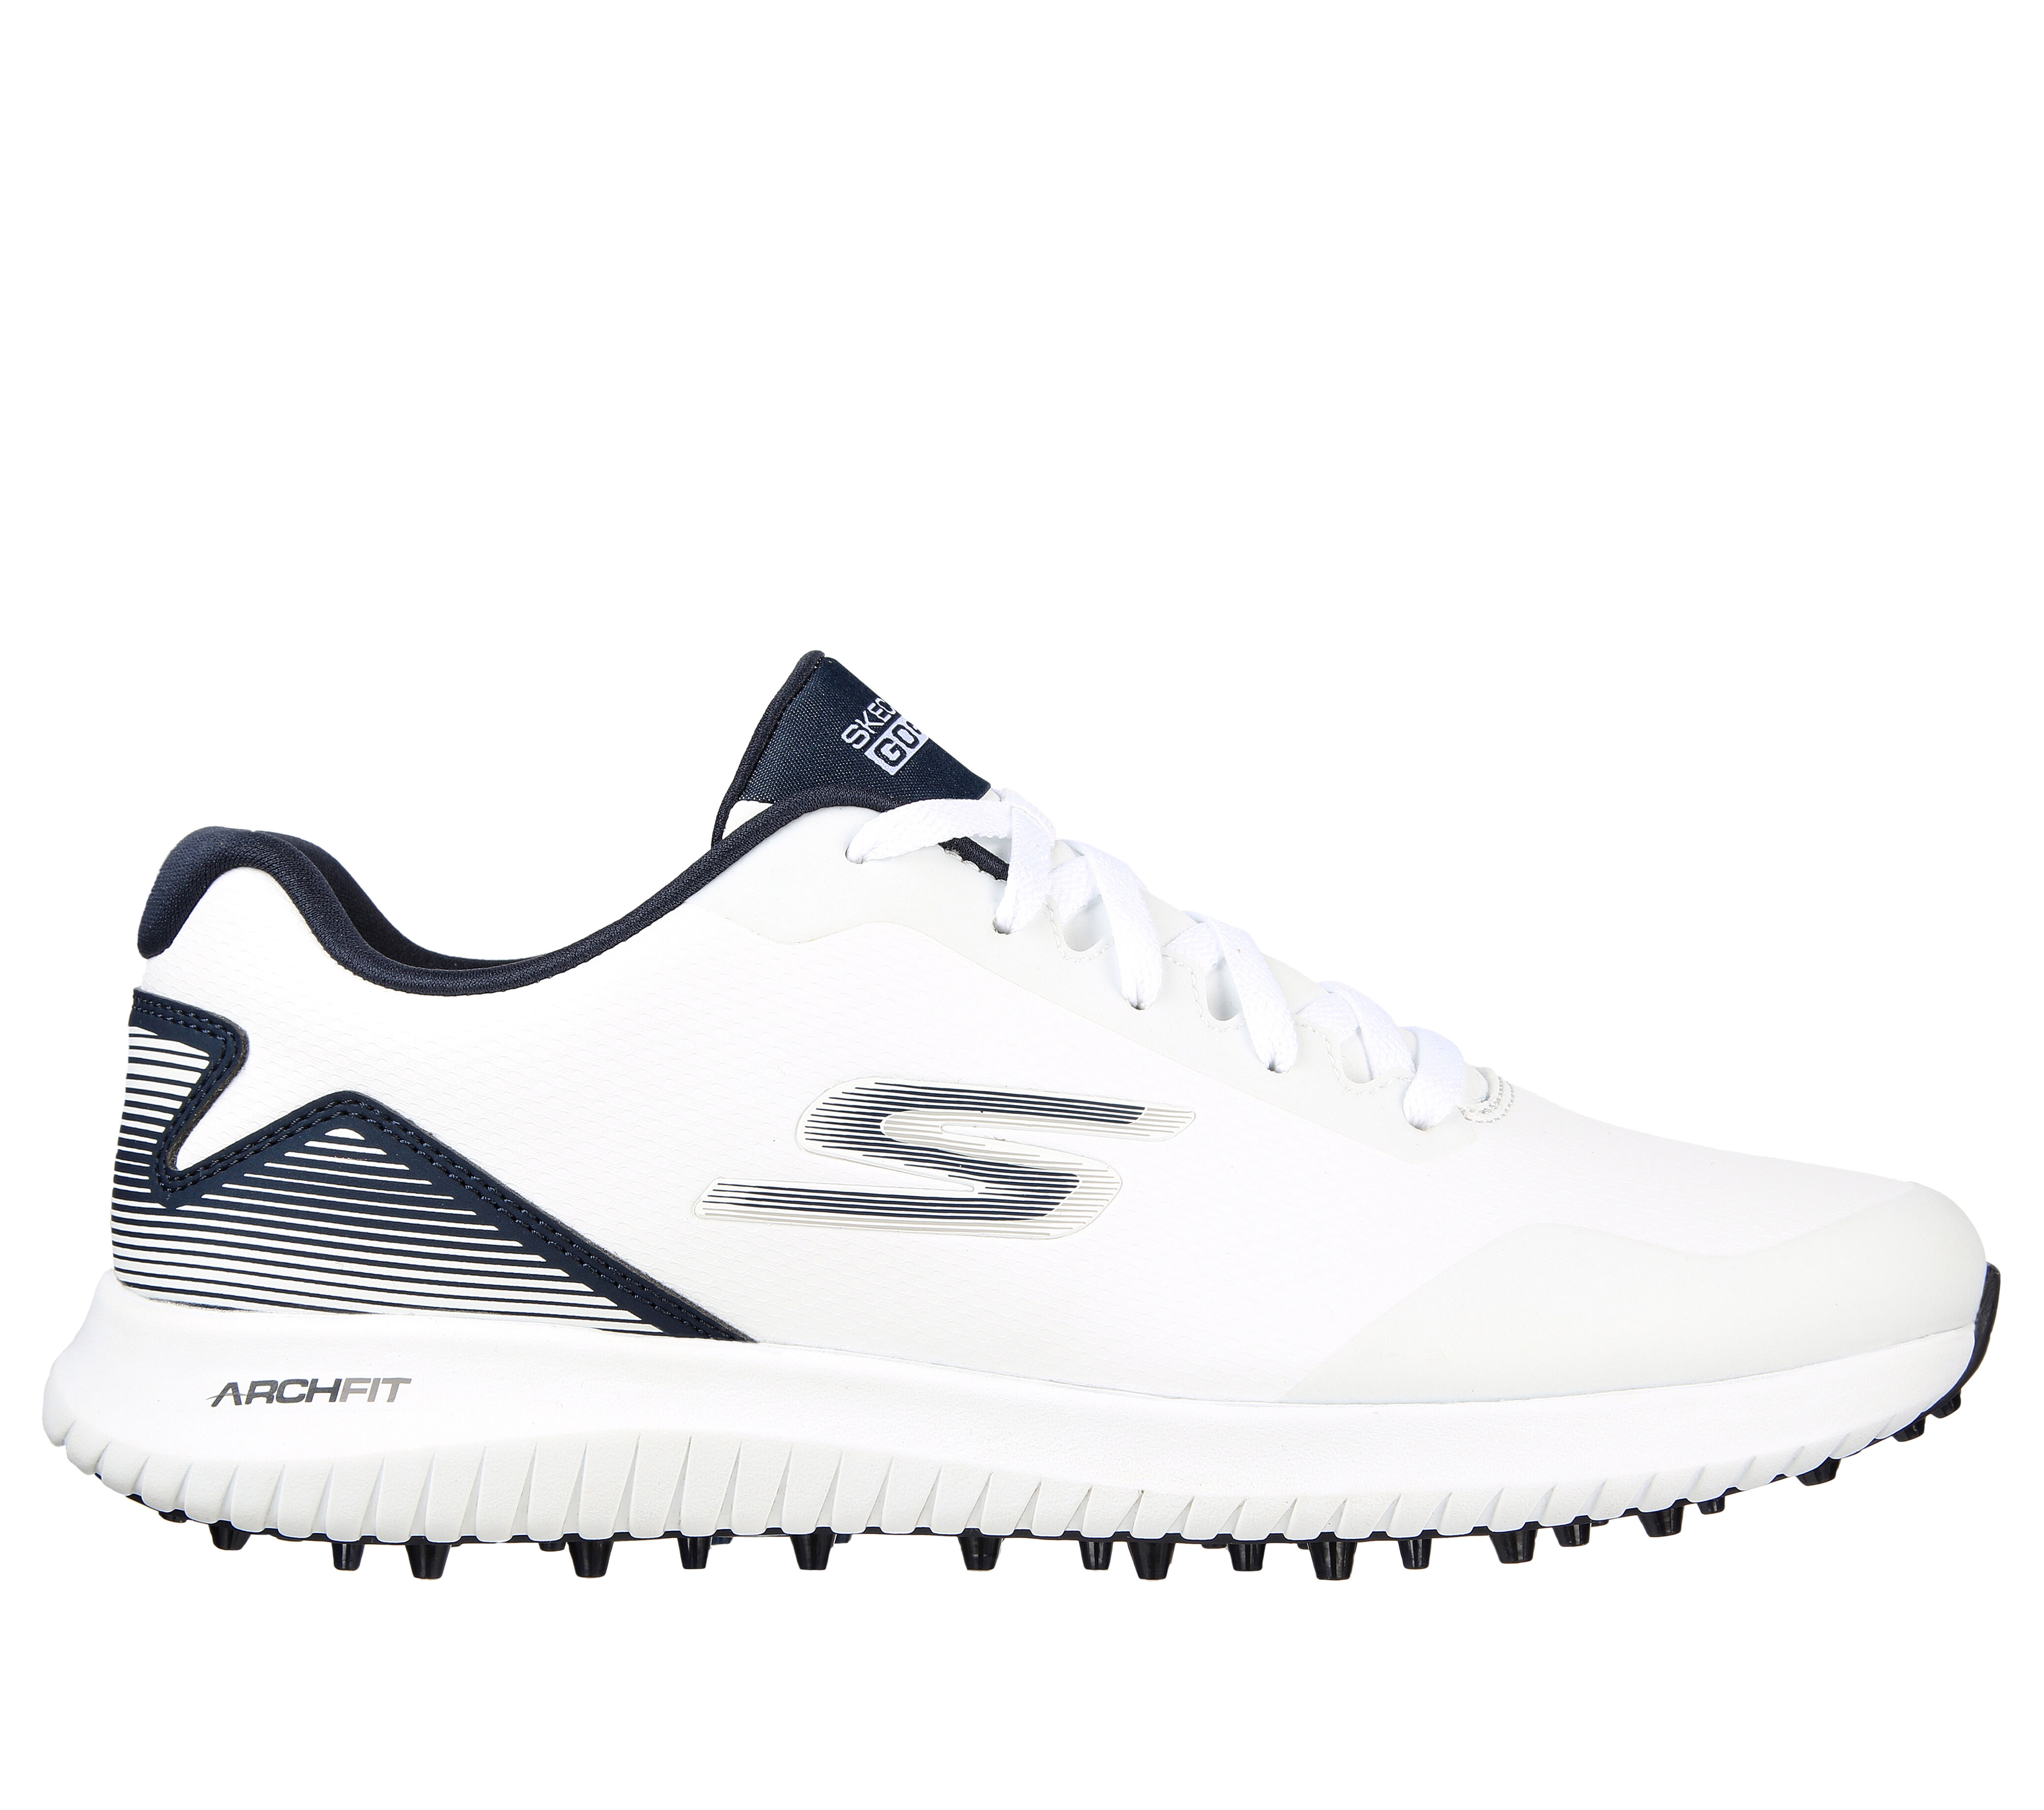 skechers golf shoes size 13